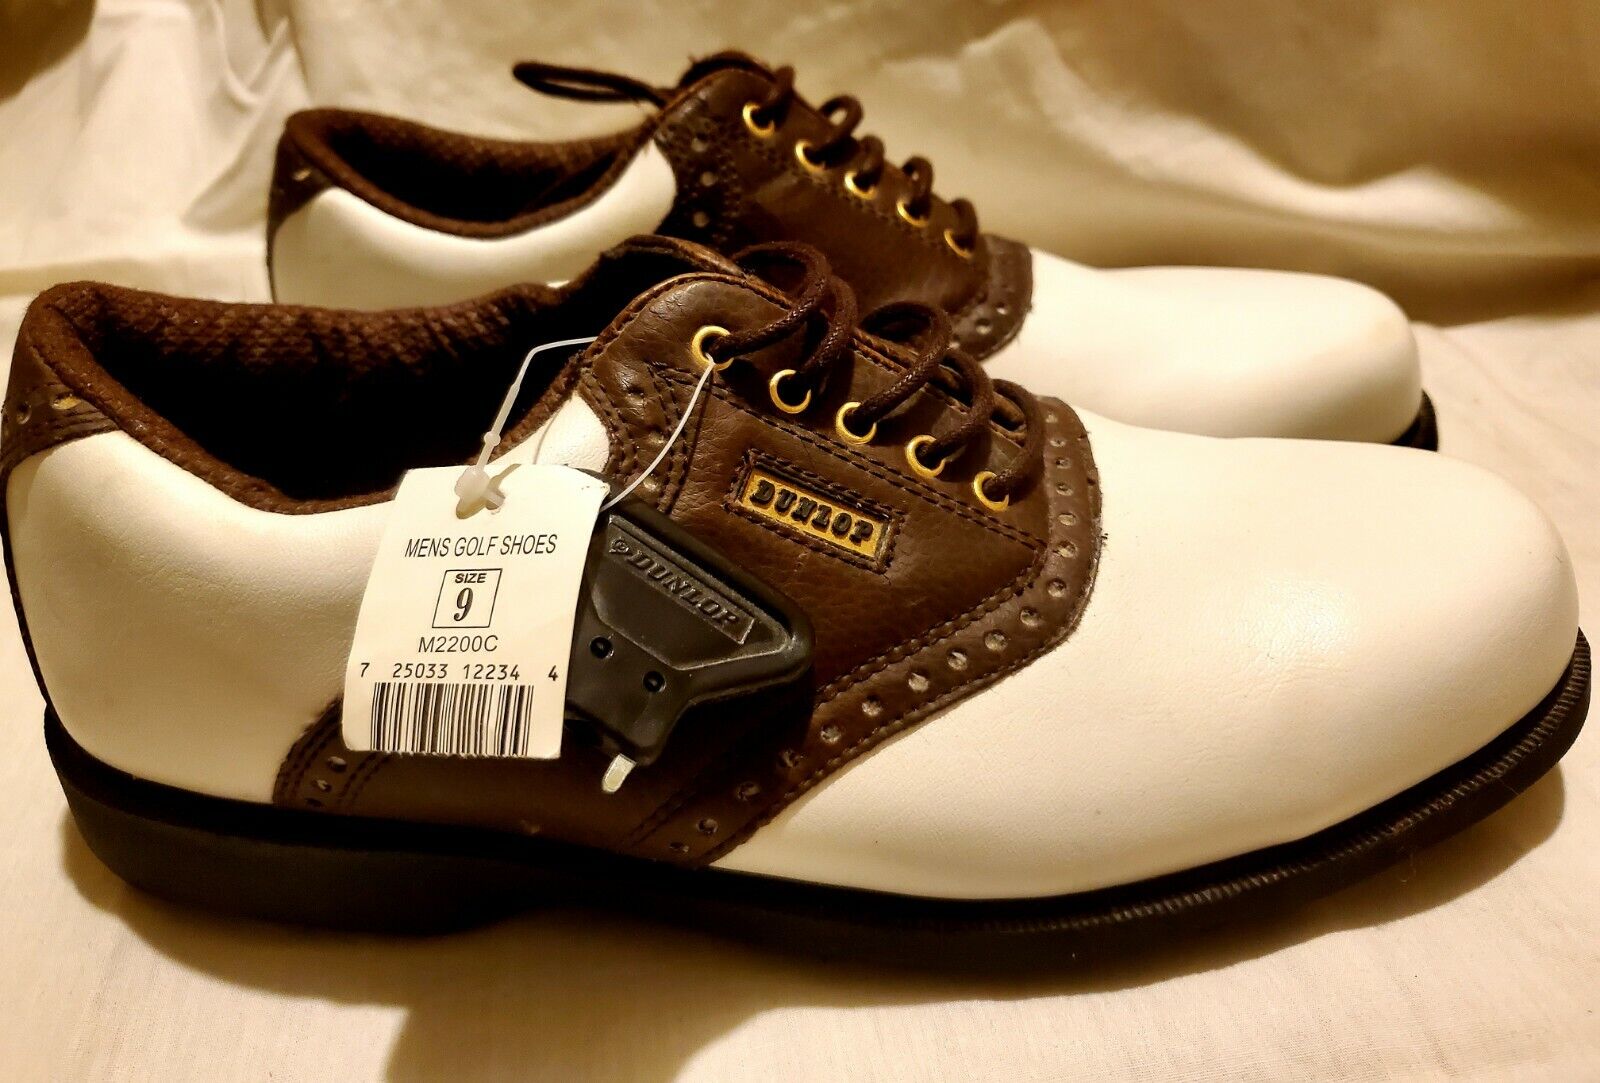 Dunlop Classic Saddle Cleat Mens Golf Shoes Size 9 M2200C White and Brown NWT